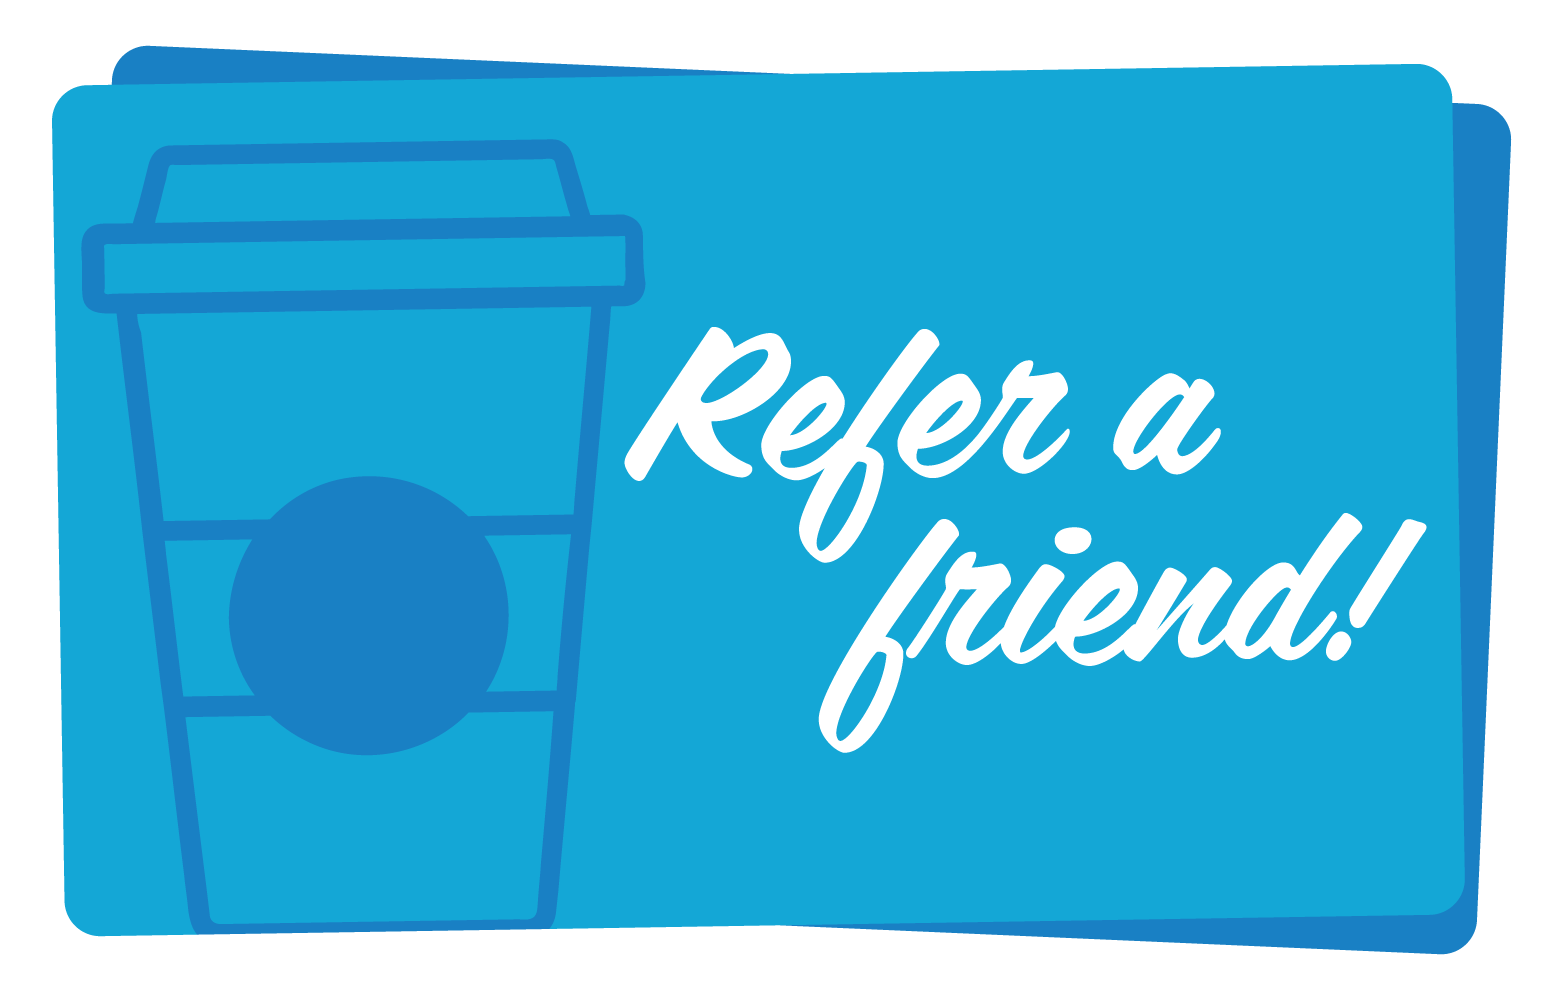 CYCP pays to refer a friend!